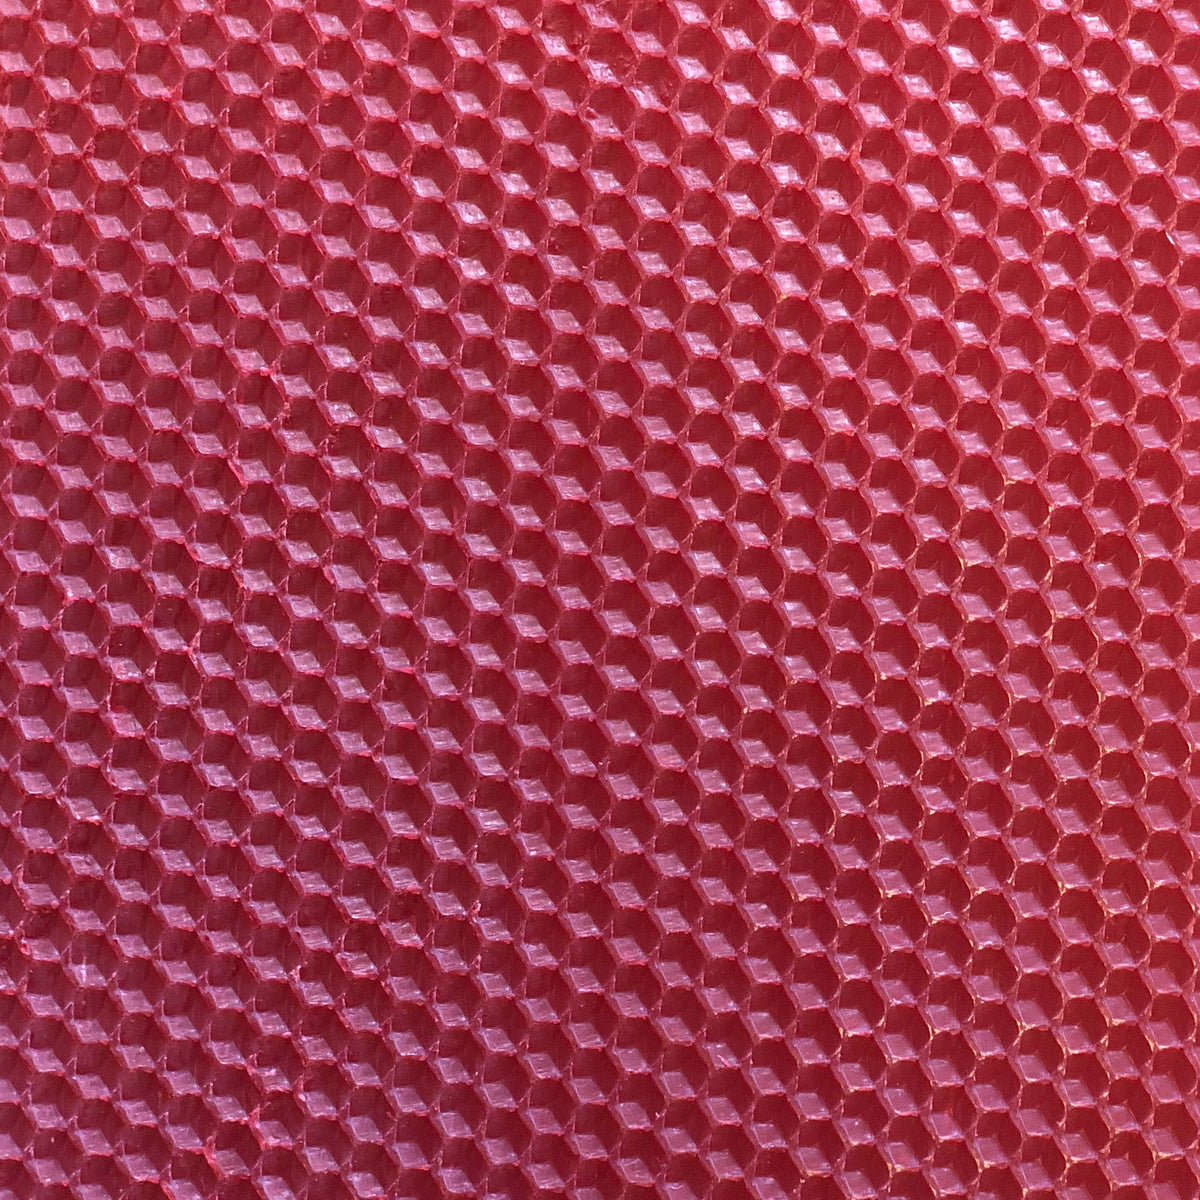 Beeswax Foundation Sheets - Very Red